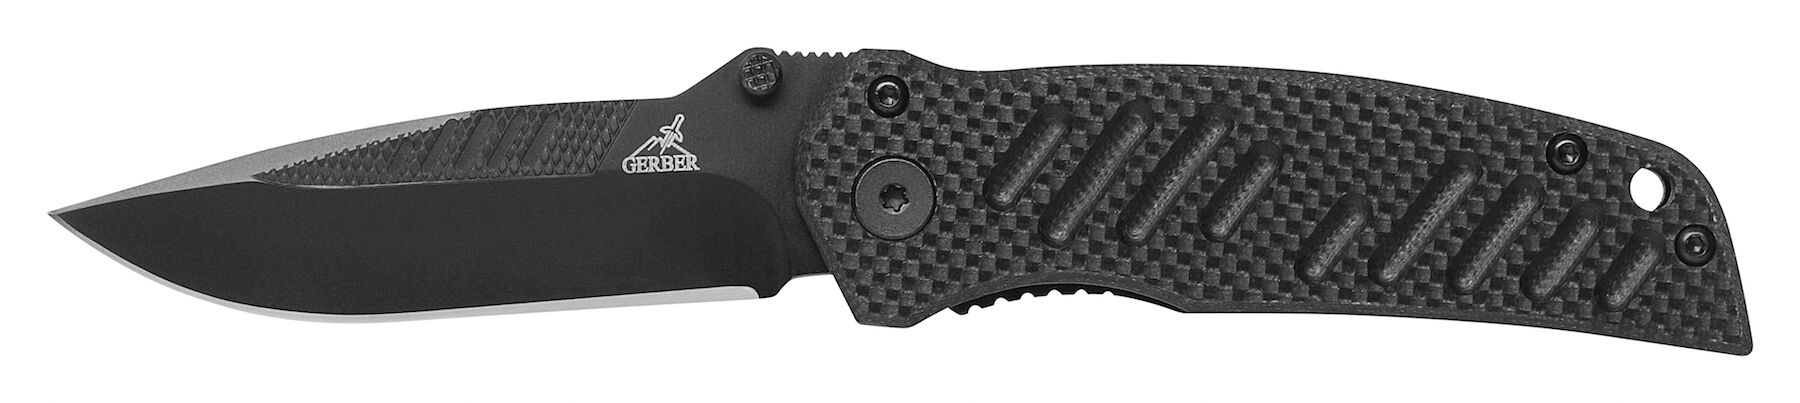 Gerber Mini Swagger - Couteau | Hardloop